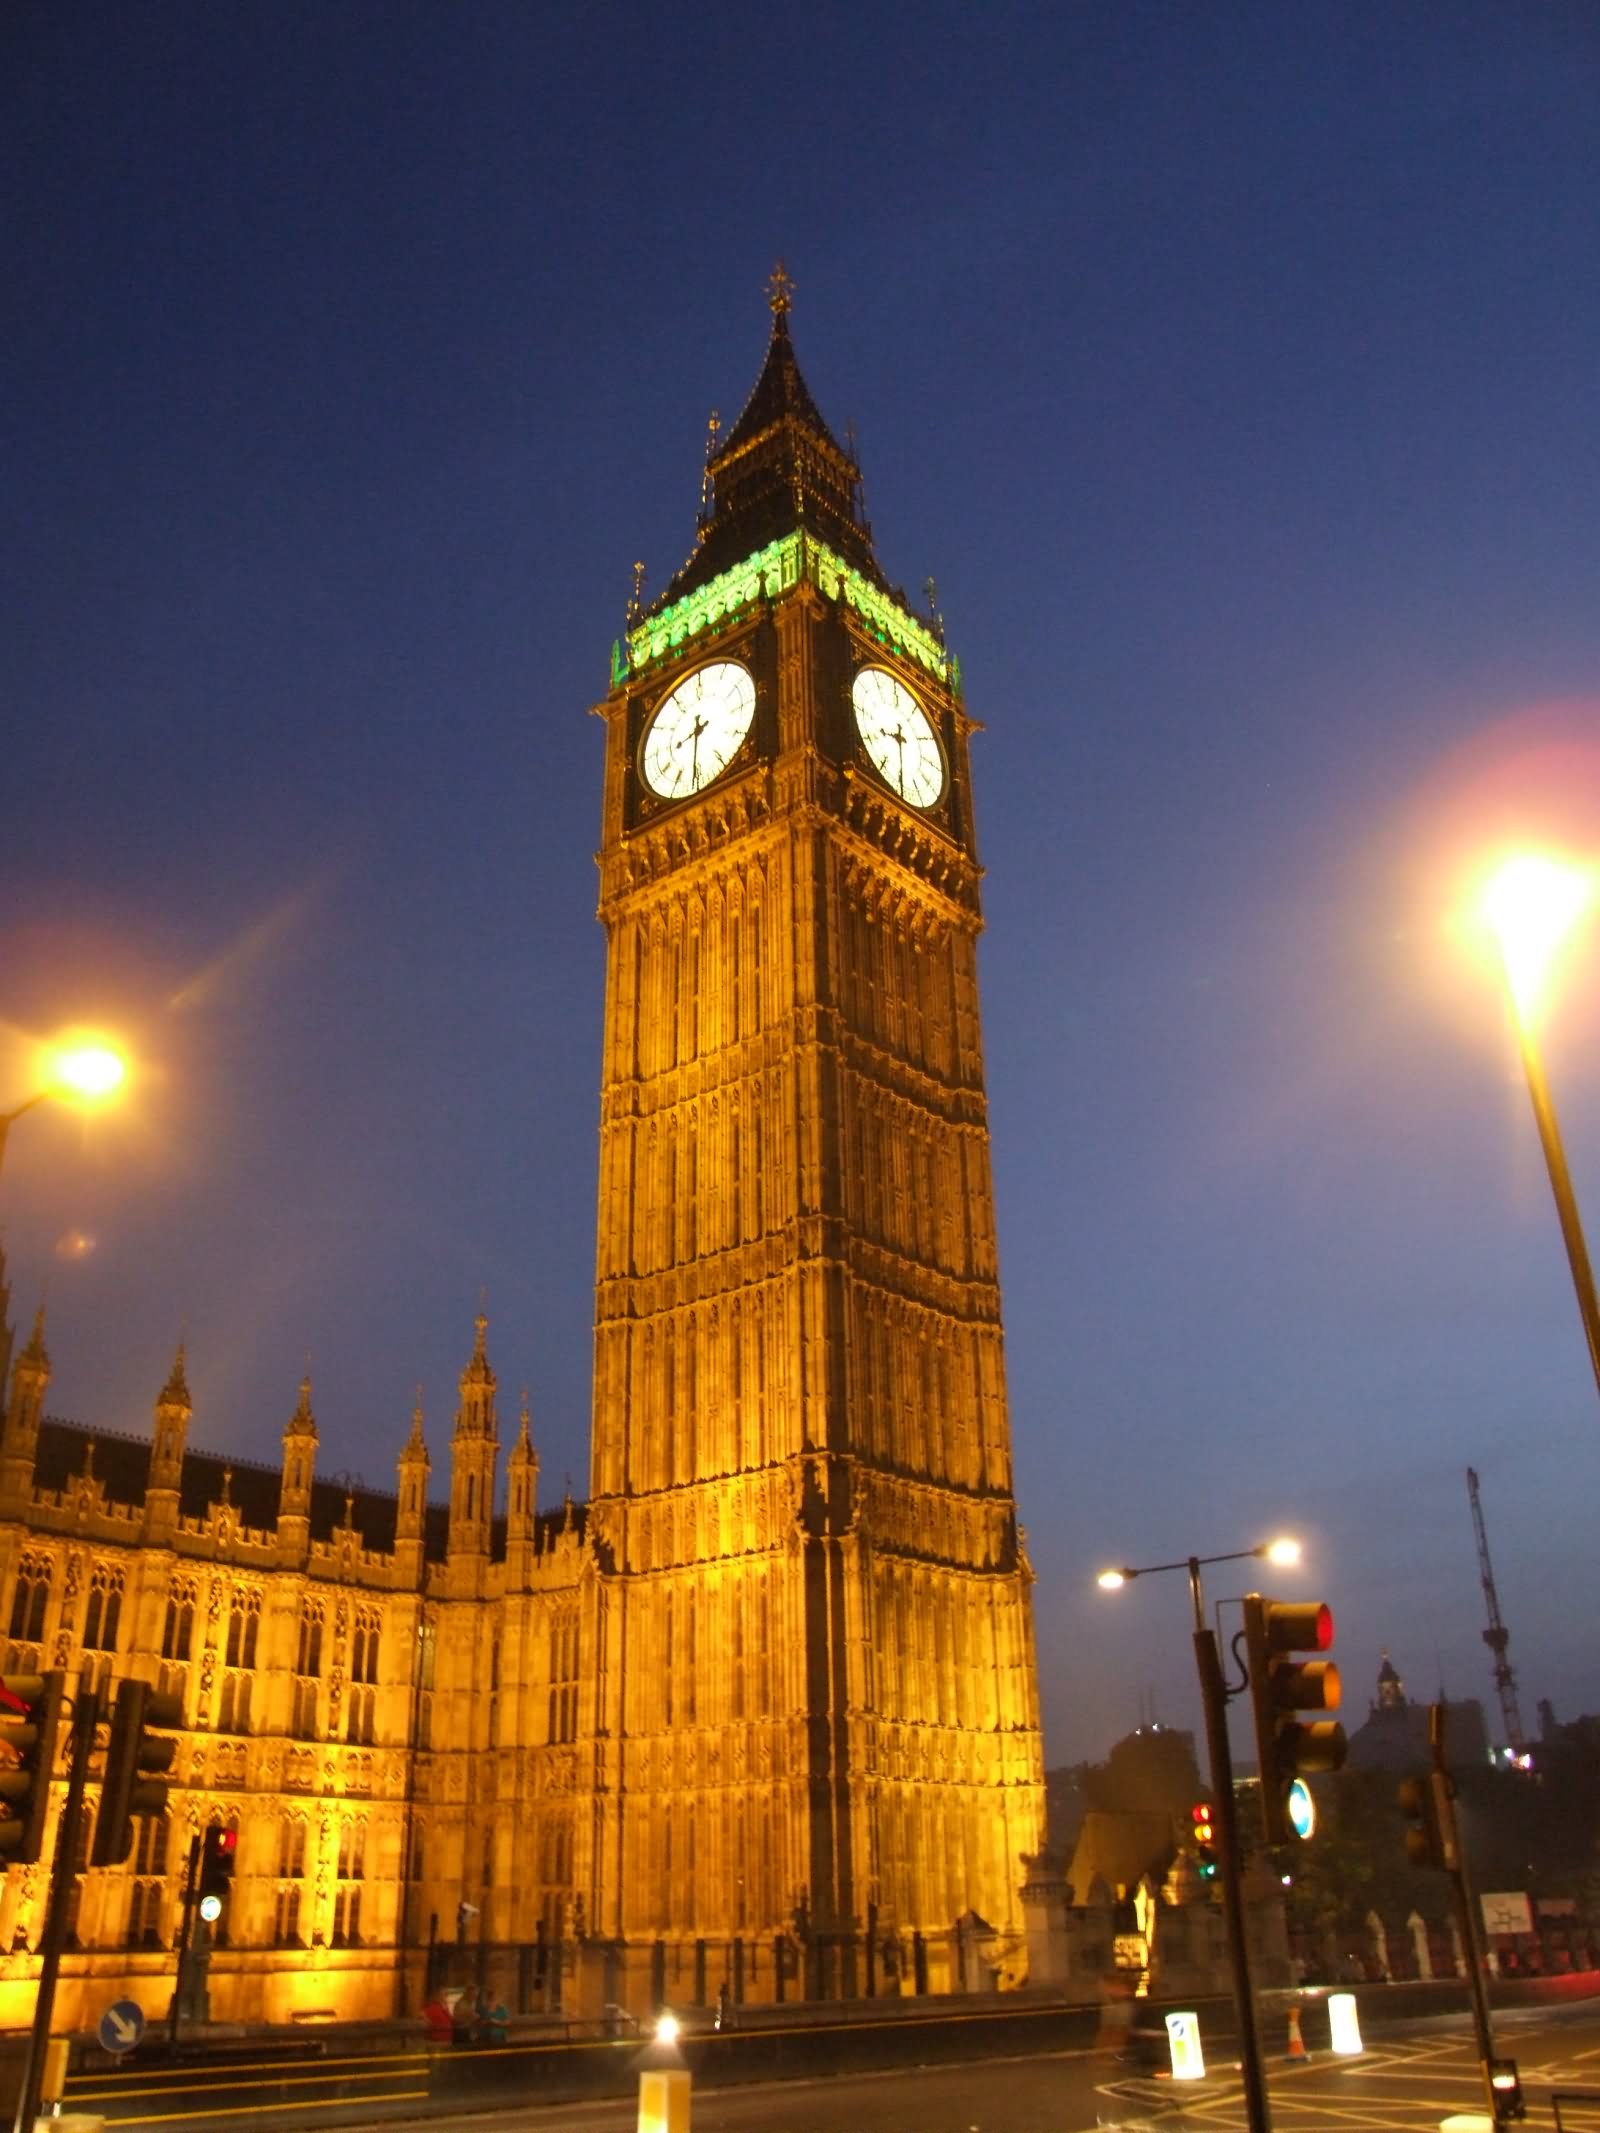 Adorable Night View Of The Big Ben, London